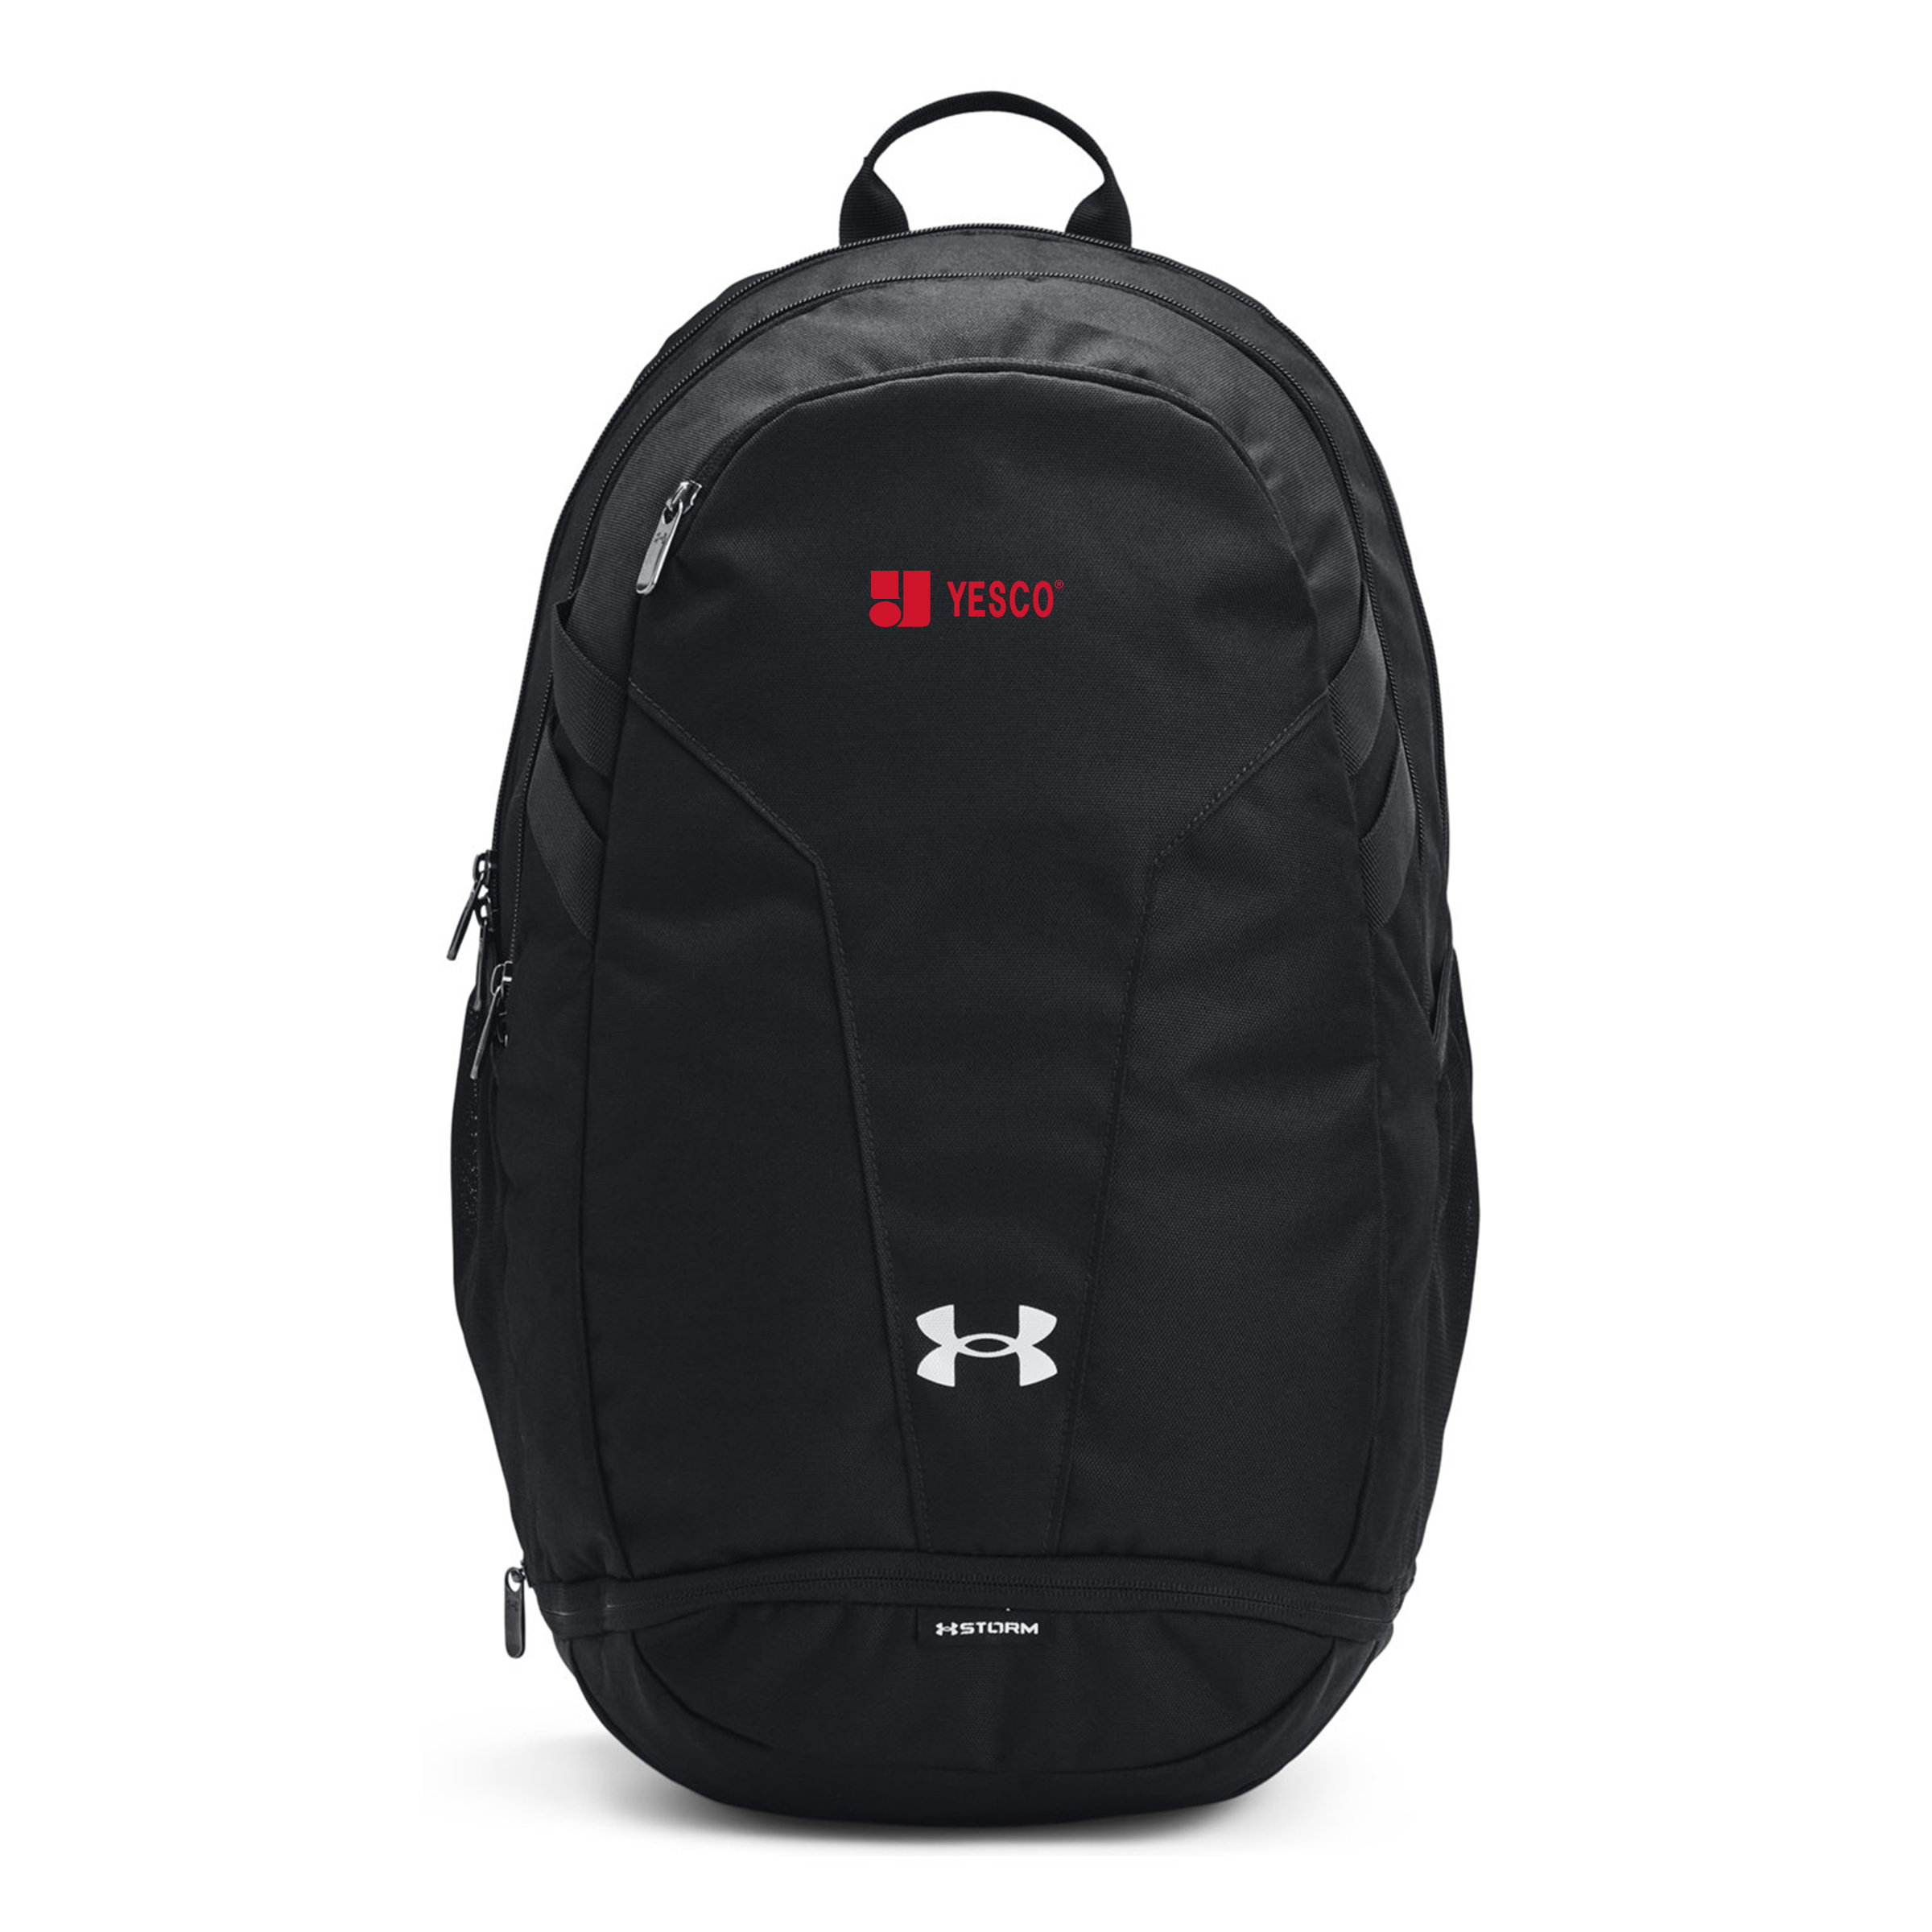 Under Armour Storm Backpack - Black/Gray